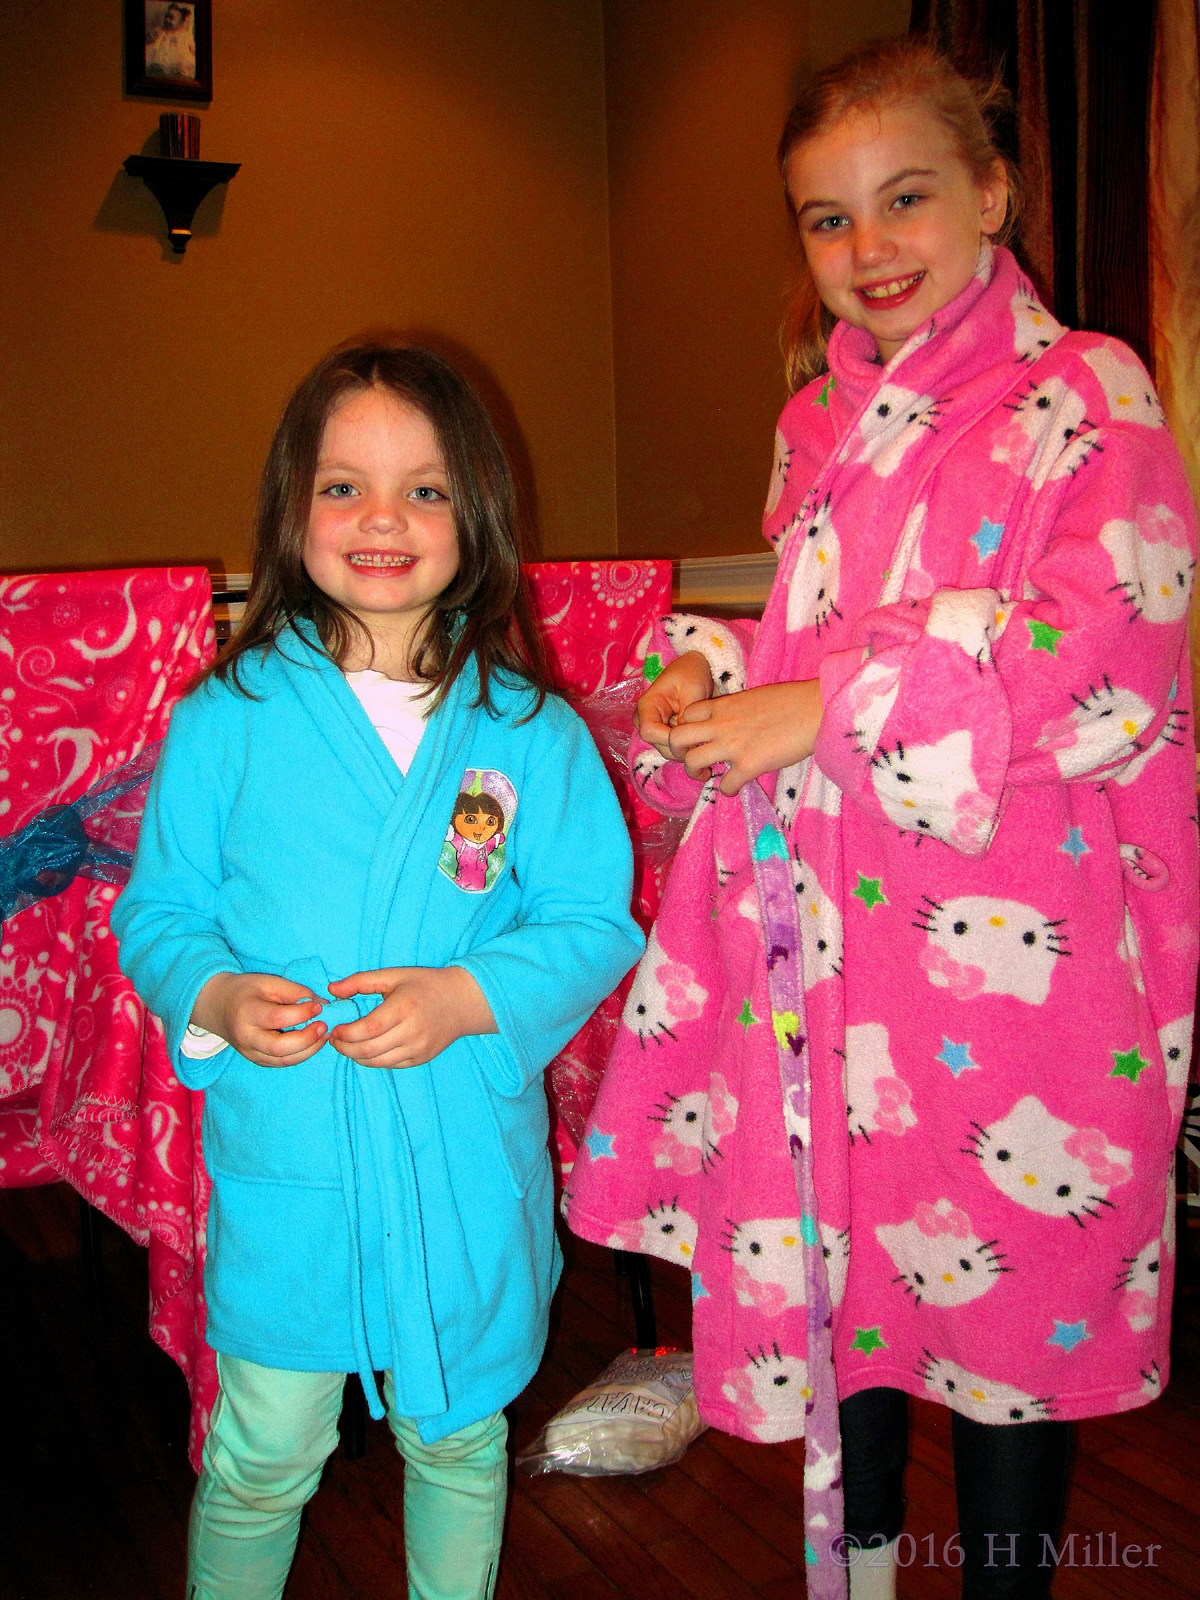 They Love Their Cute Spa Robes! 